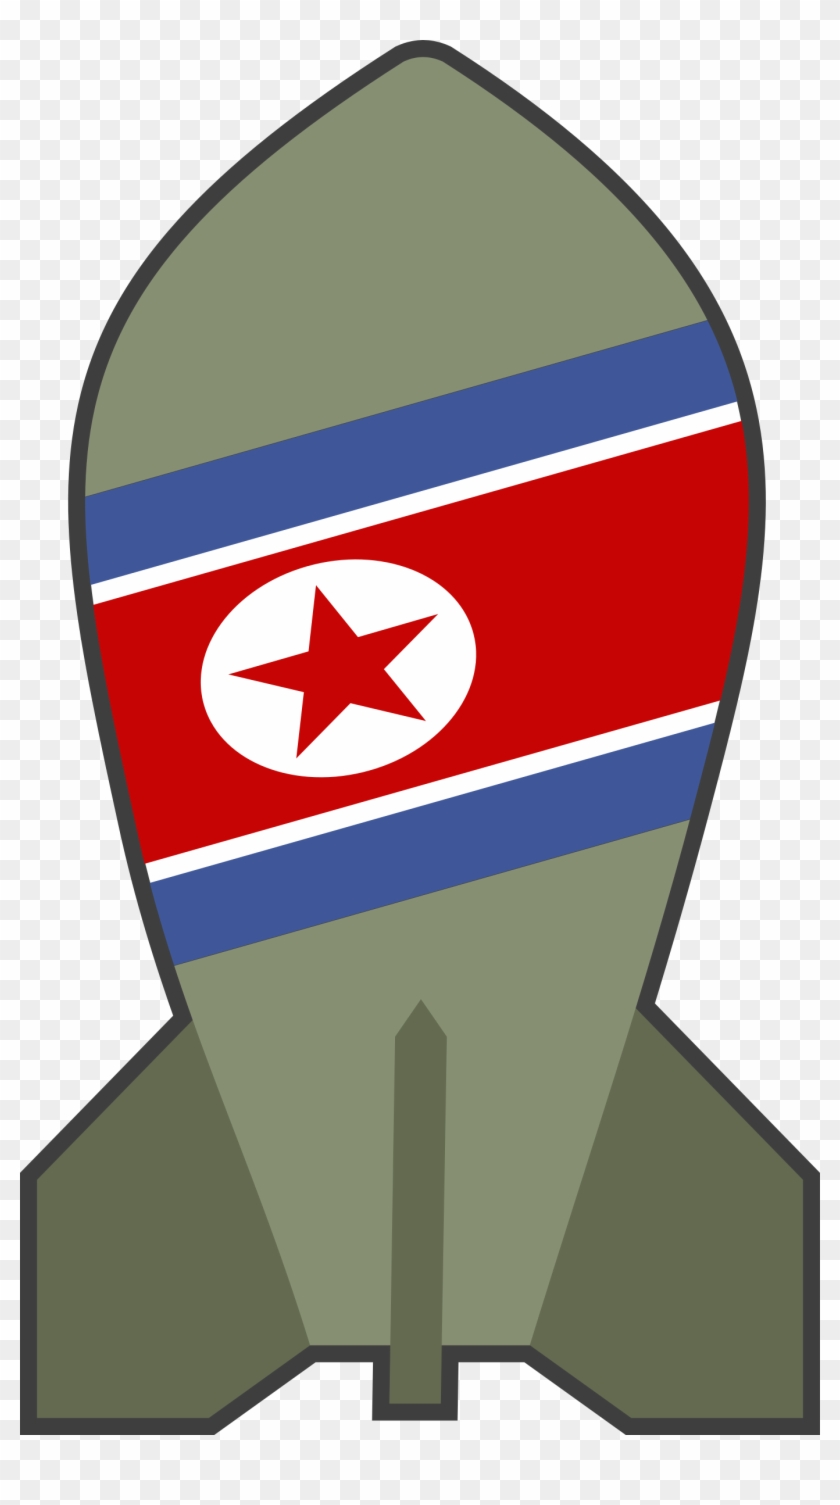 Free Crunch Cliparts, Download Free Clip Art, Free - North Korea Nuke Png #266603